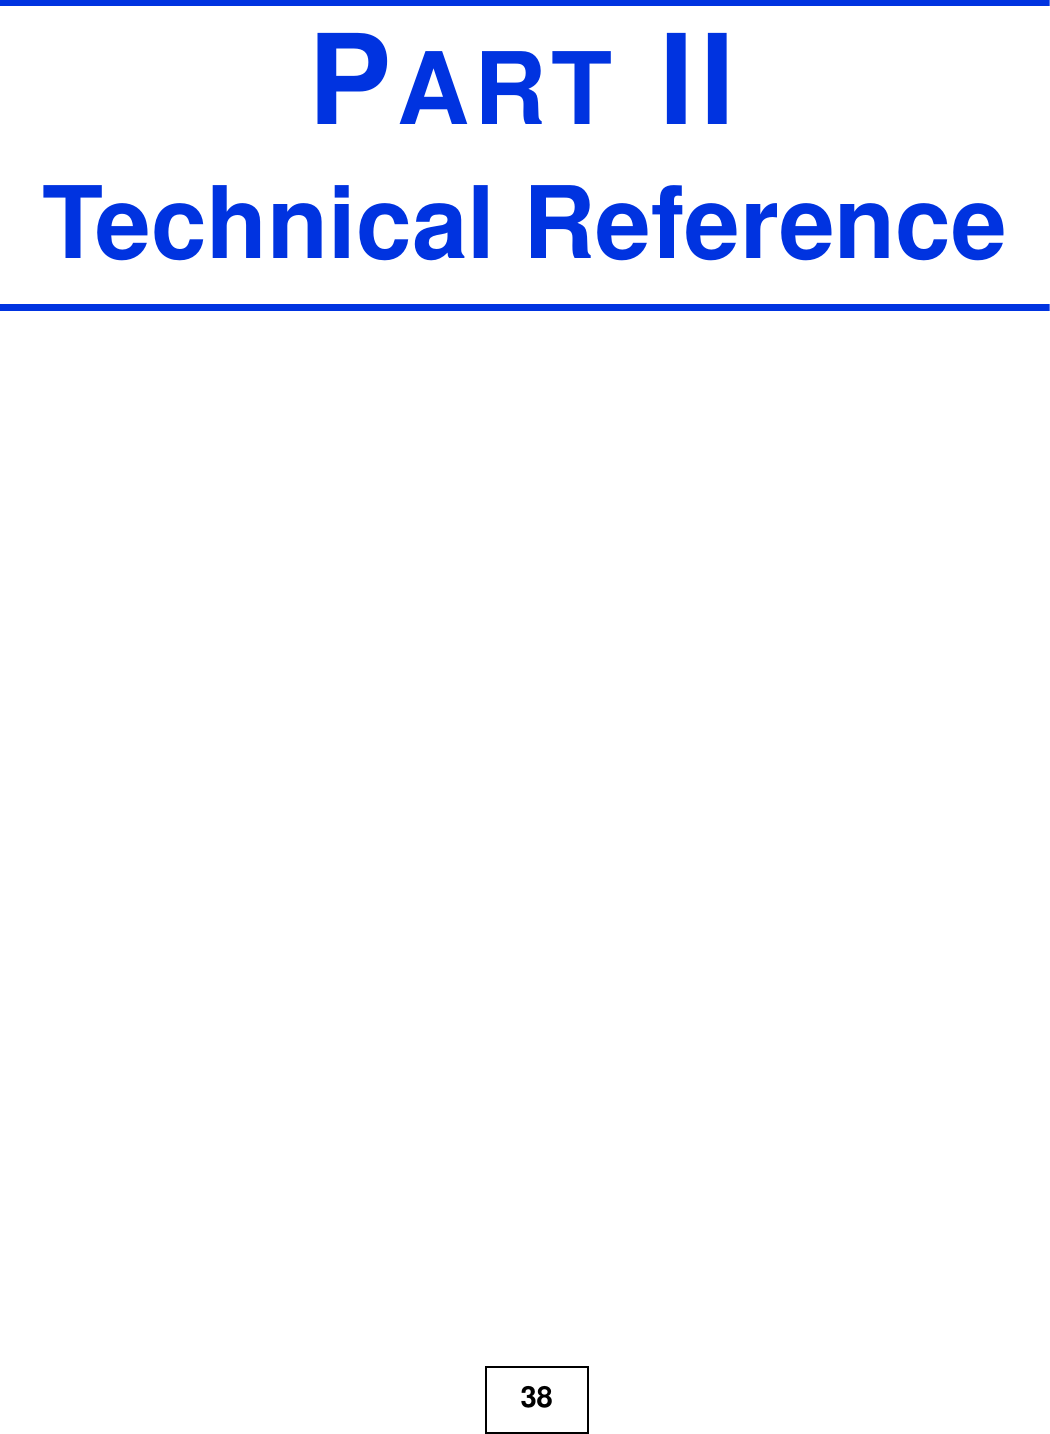 38PART IITechnical Reference